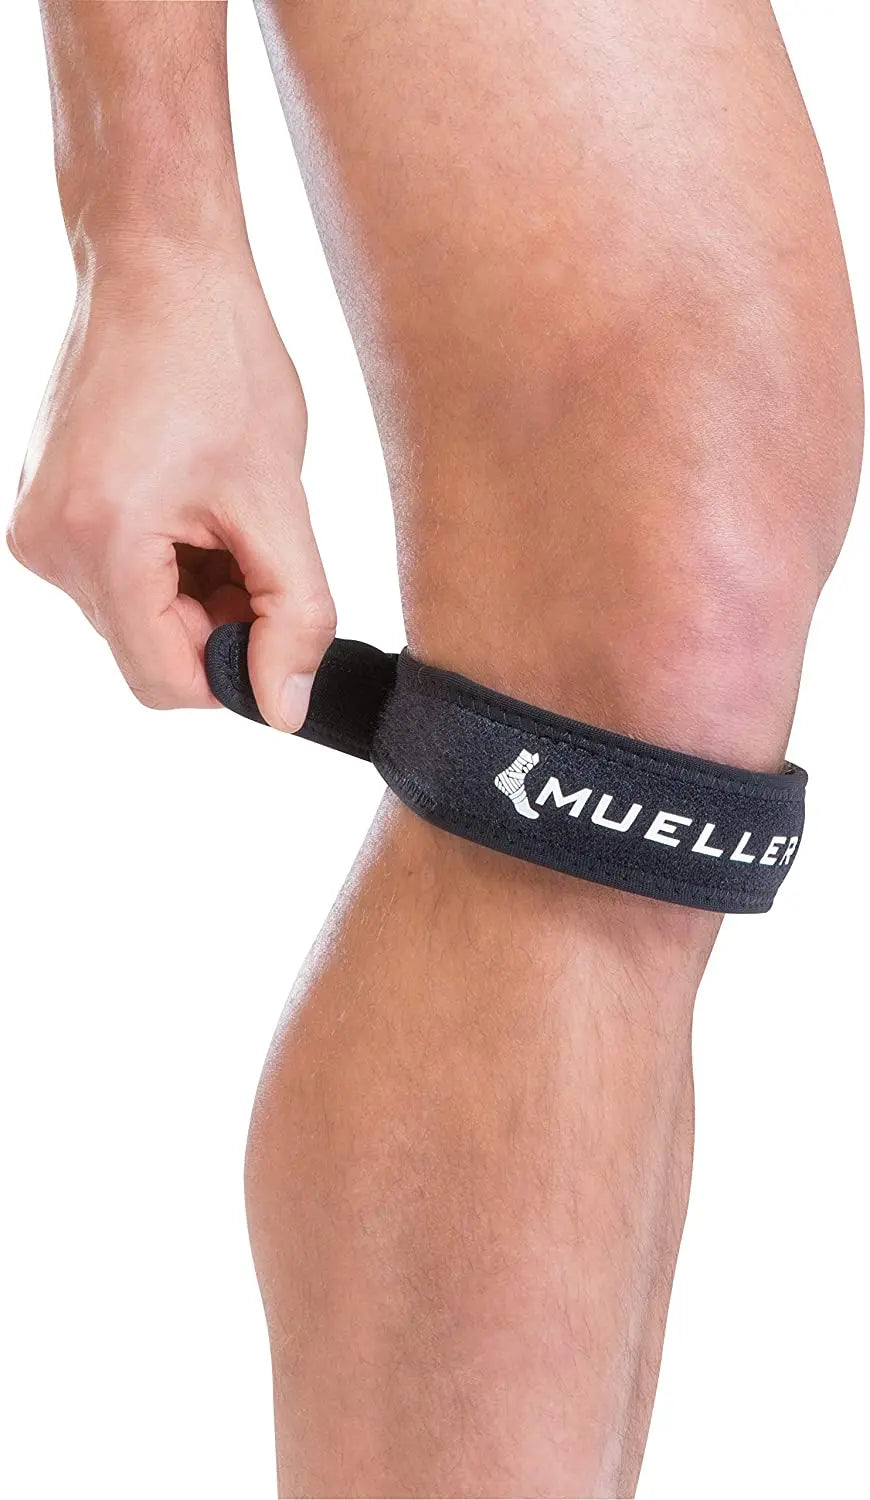 Mueller Jumper's Knee Strap, One Size Fits All - Home Health Store Inc